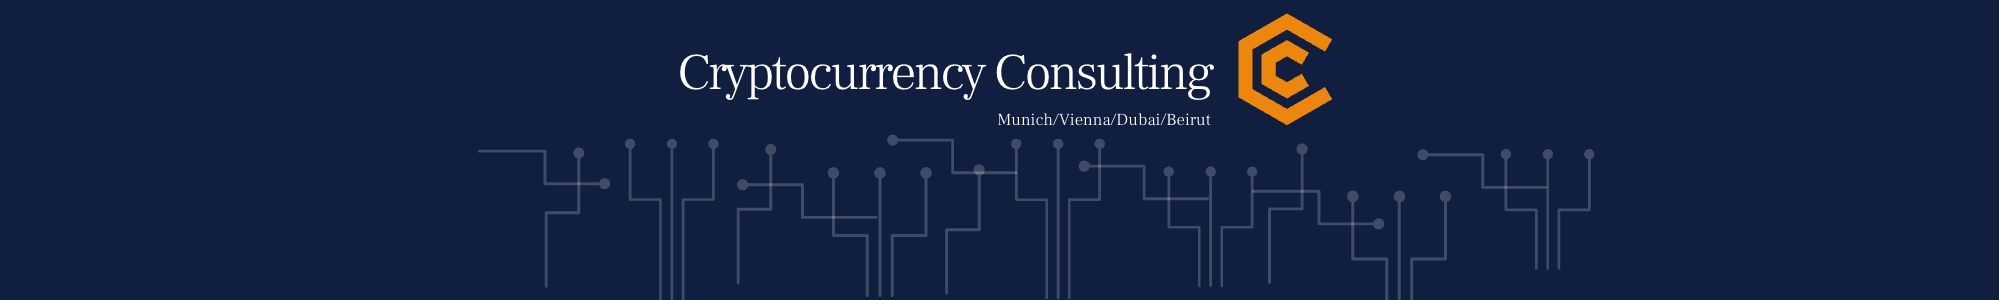 Cryptocurrencyconsulting 横幅